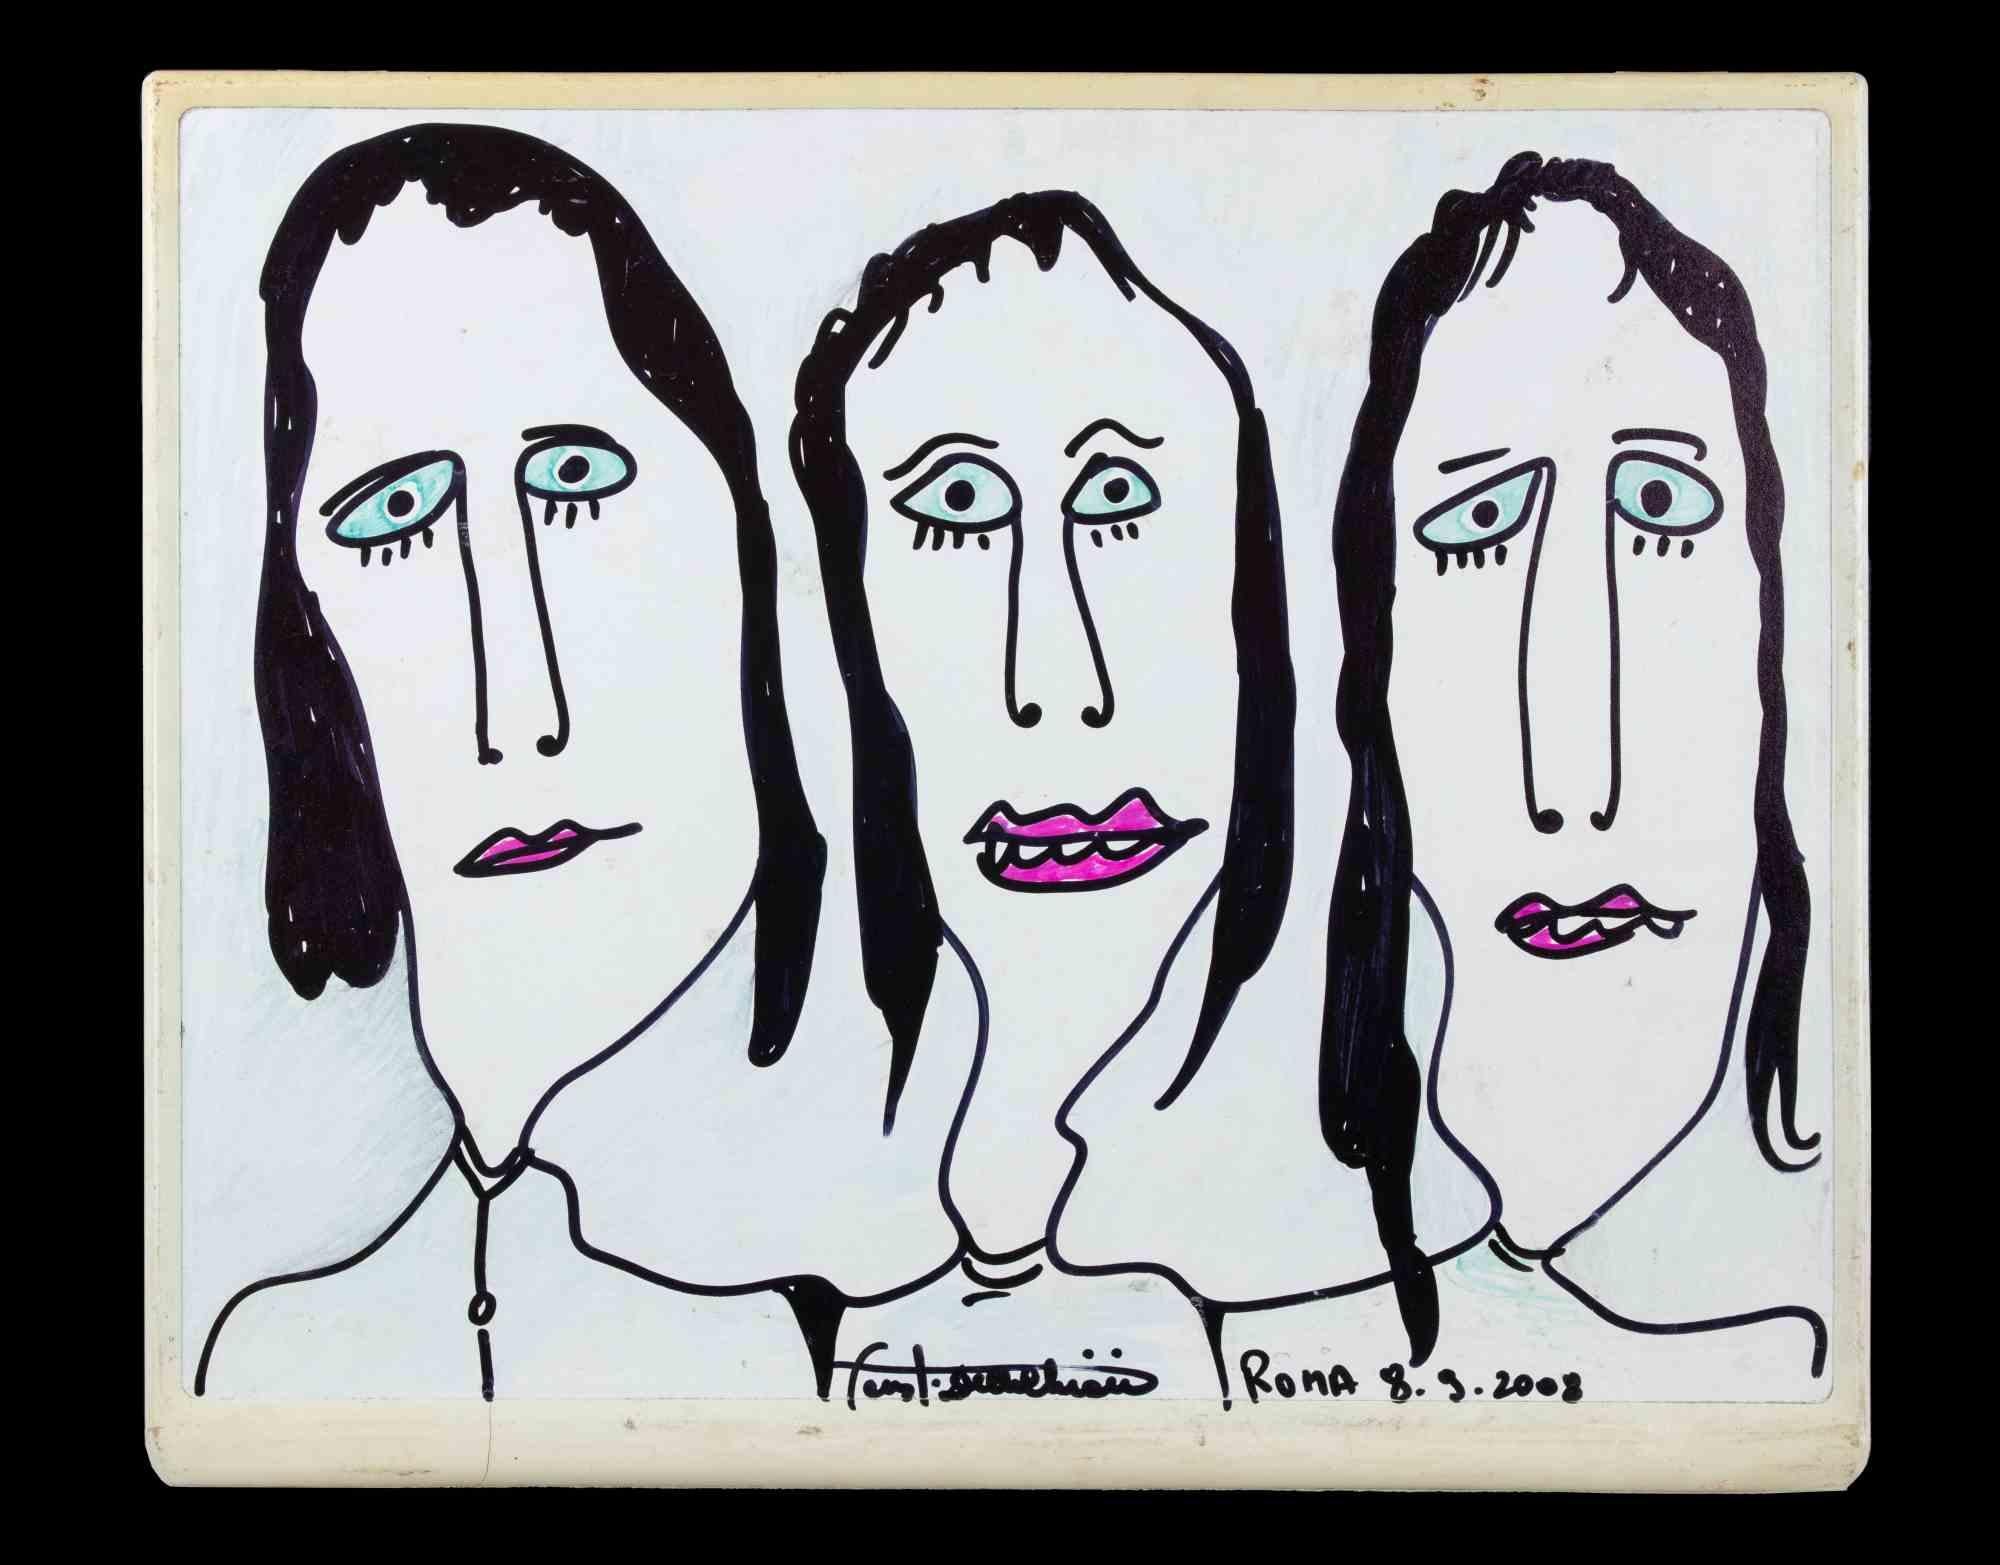 Women is an original contemporary artwork realized by the italian artist Fausto delle Chiaie (1944) in 2008.

Pen marker on canvas.

Hand signed and dated on the lower margin.

Hand-written dedication on the lower margin.